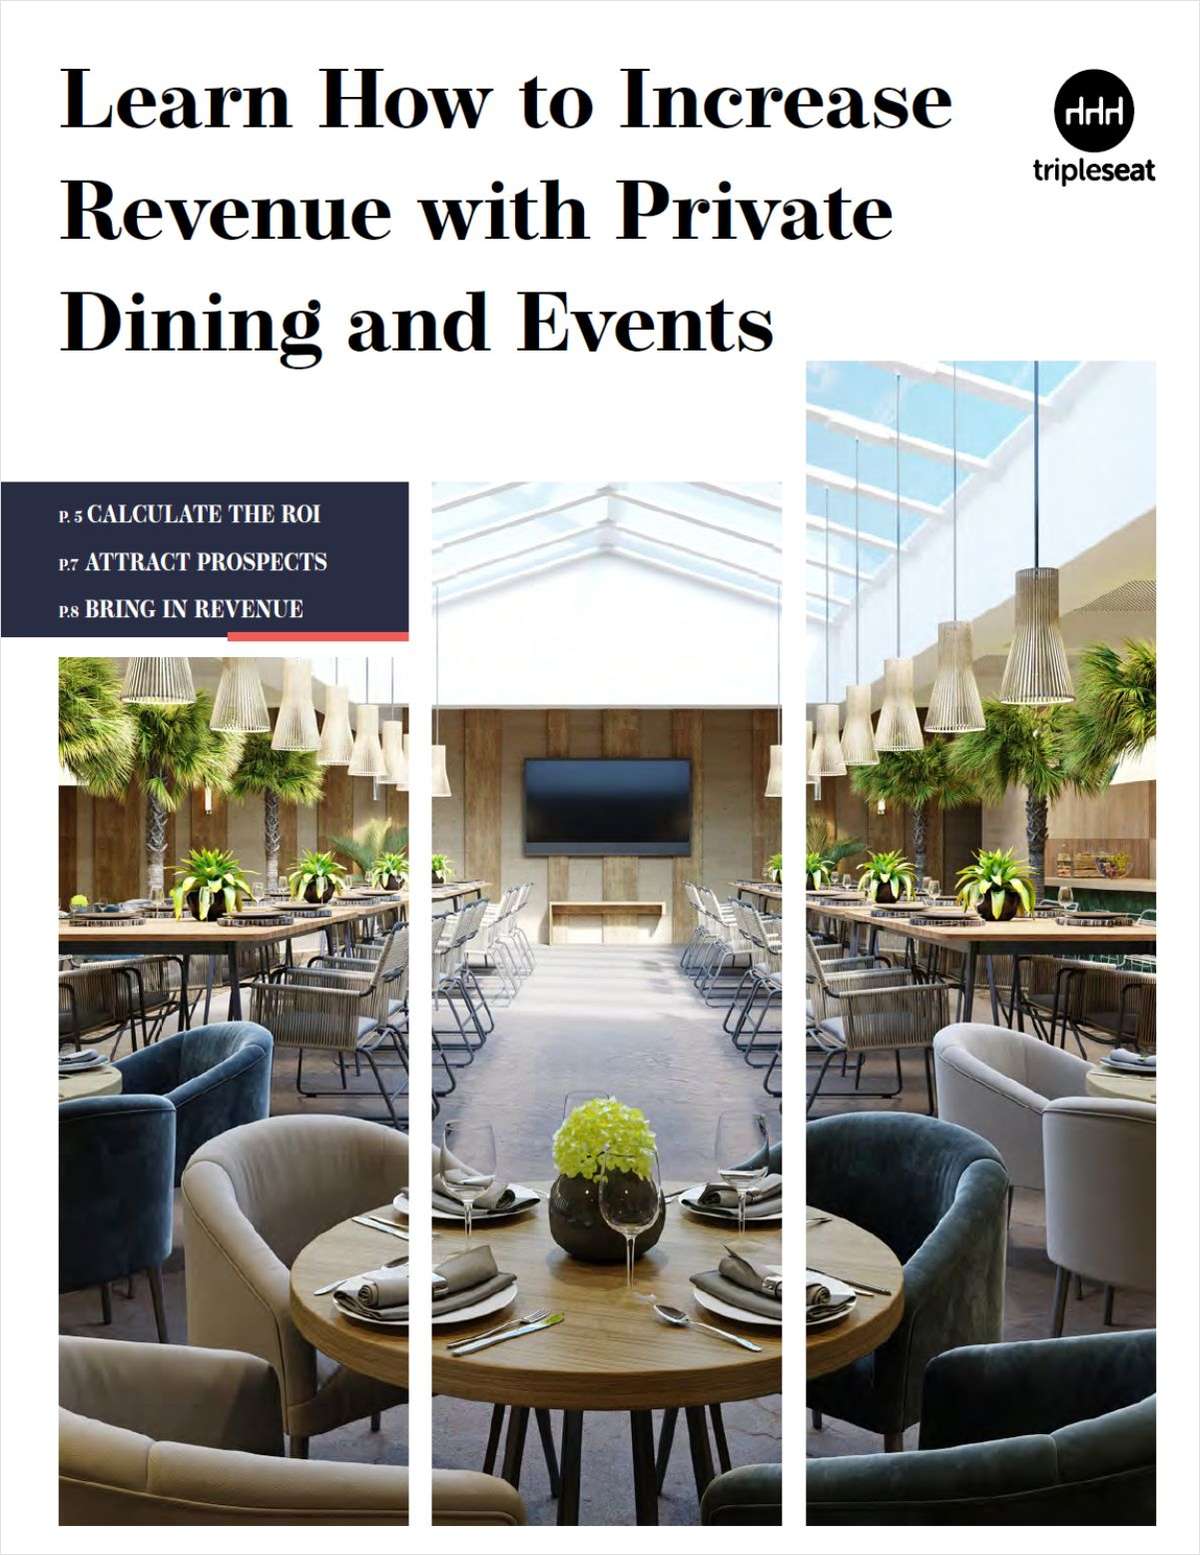 Increase Revenue with Private Dining and Events